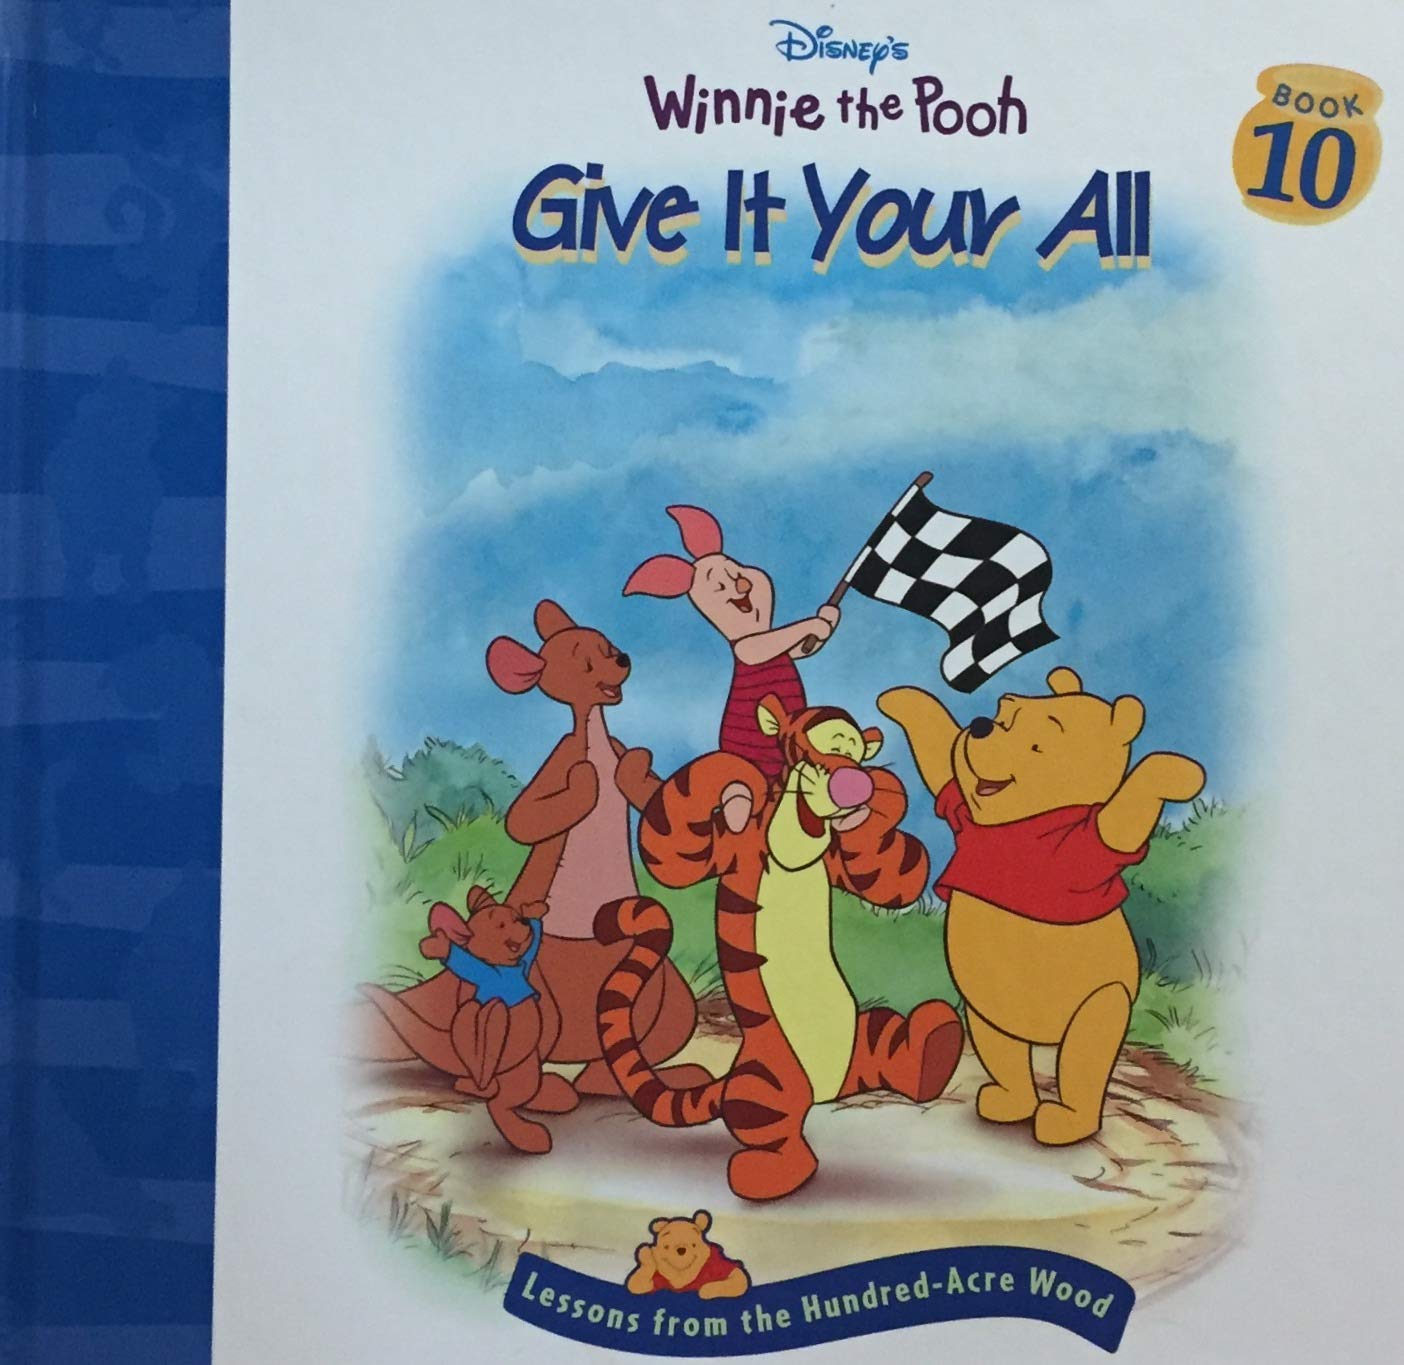 Winnie the Pooh (Lessons from the Hundred-Acre Wood) # 10 : Give It Your All - Disney